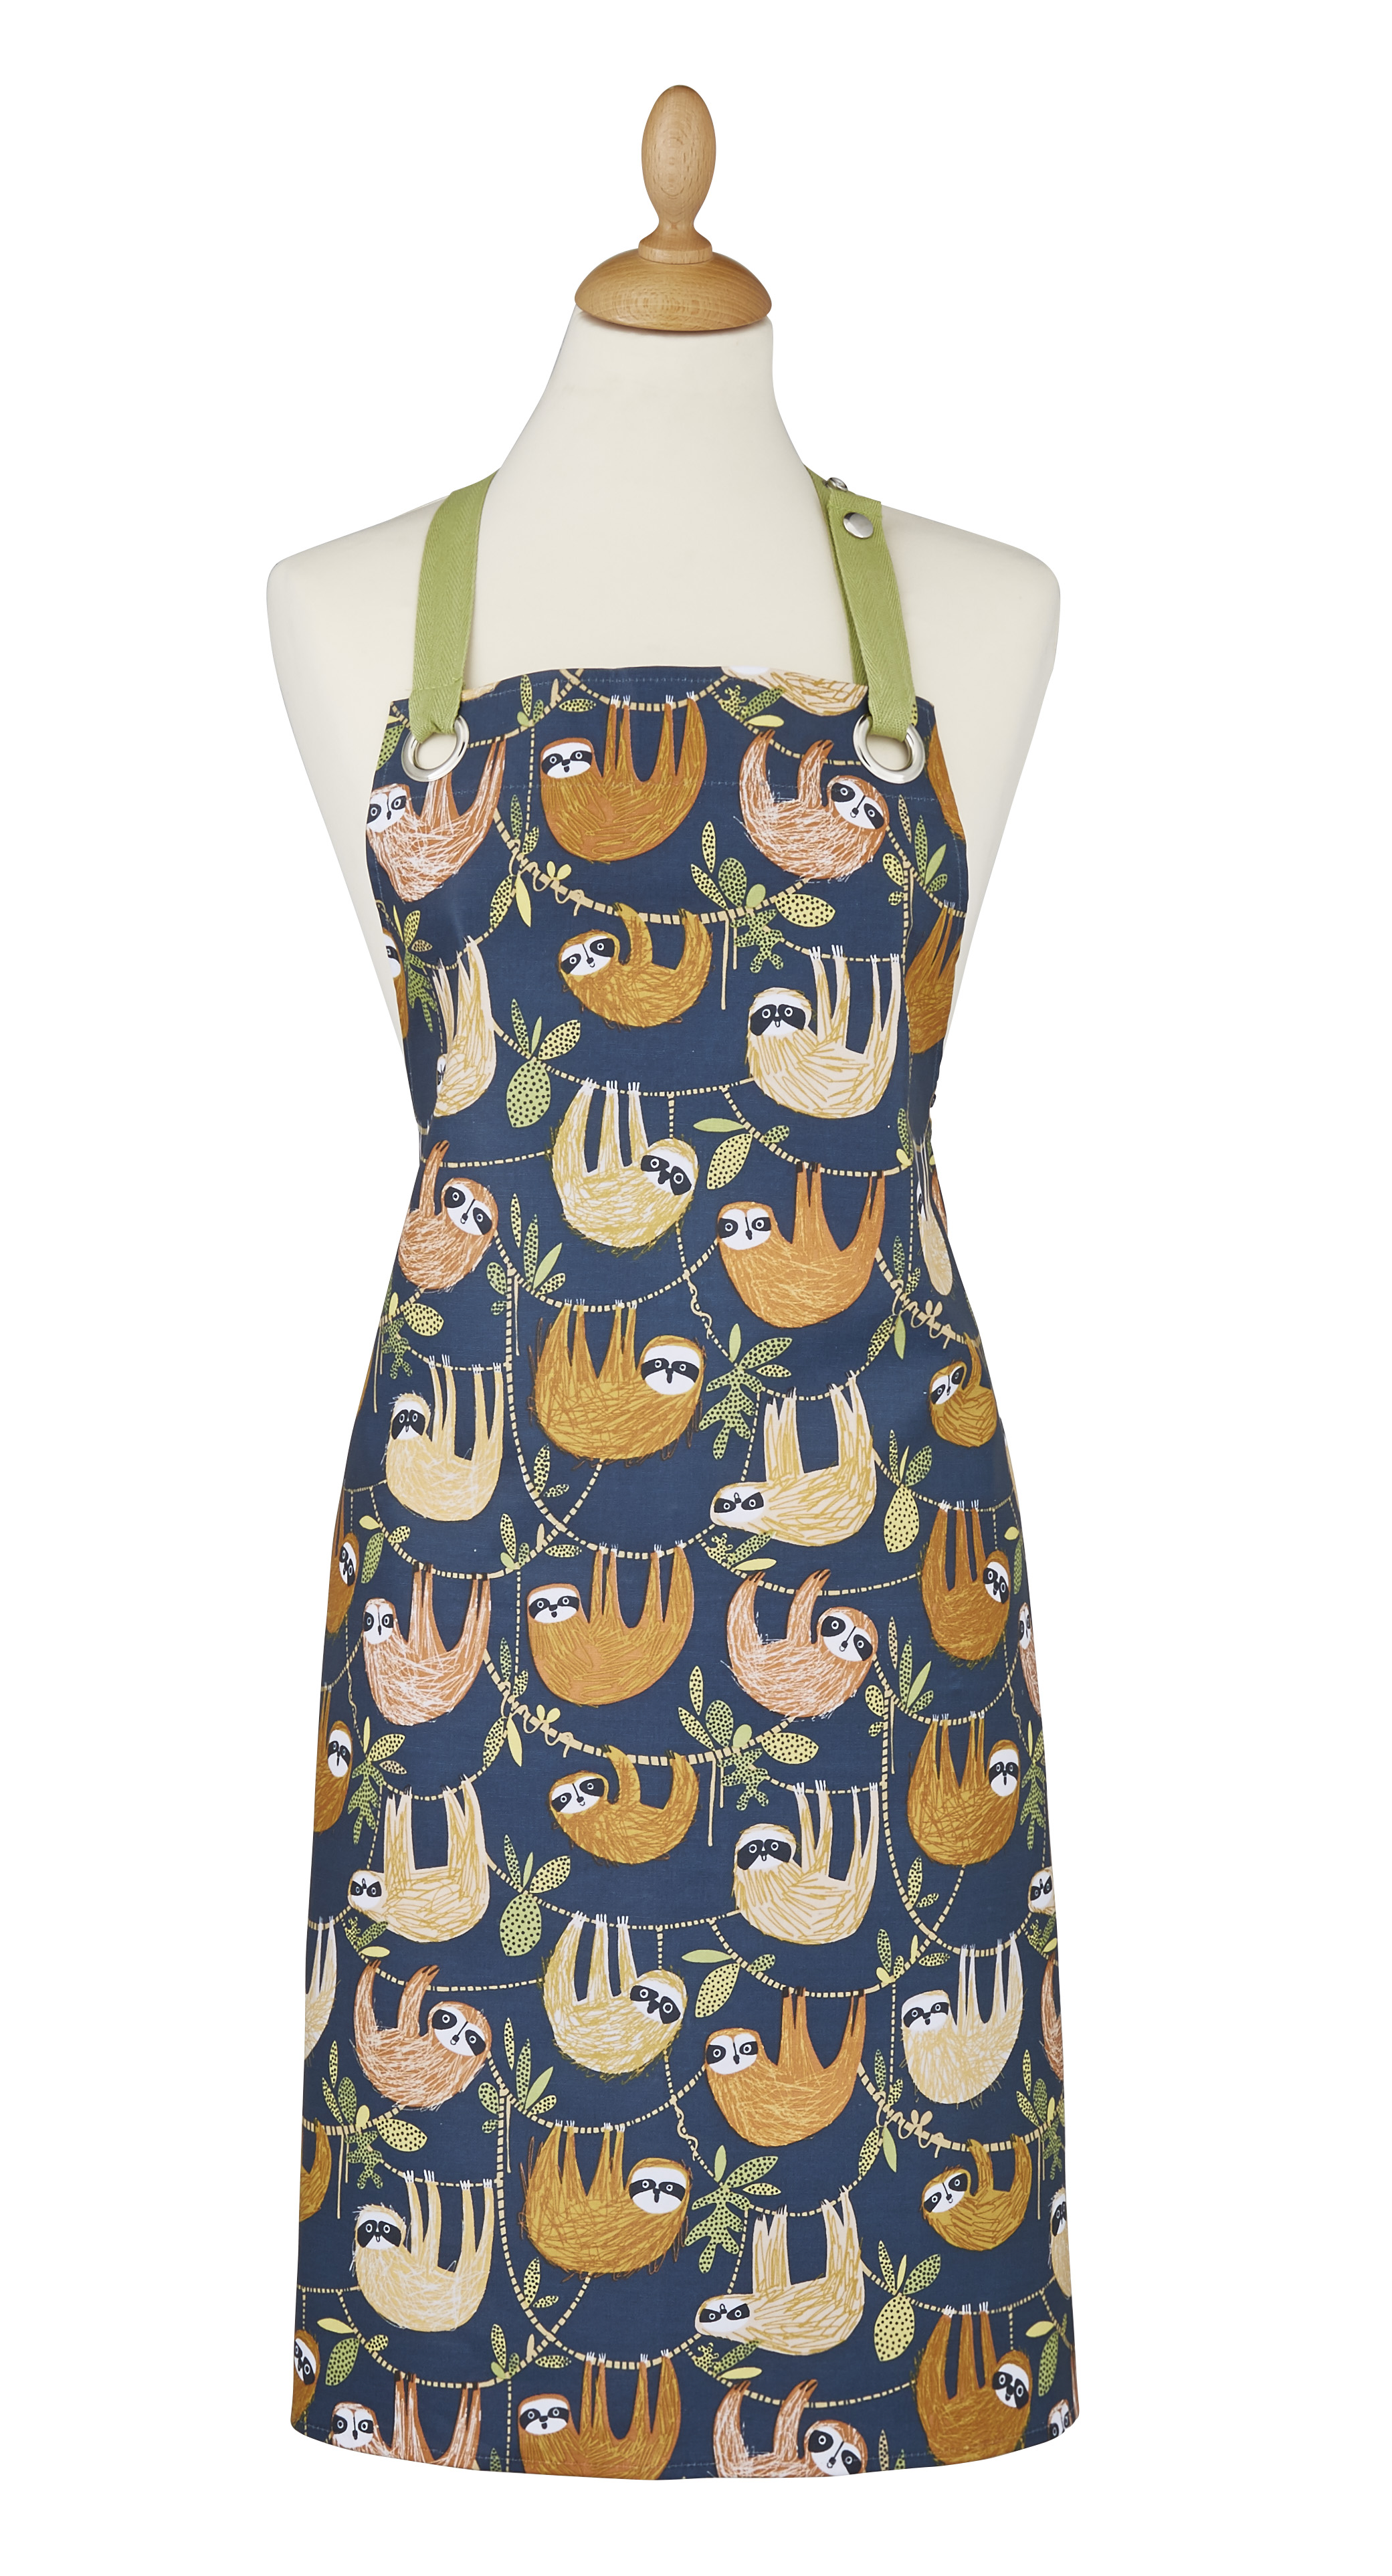 Ulster Weavers Sloth Hanging Around Oilcloth Apron 